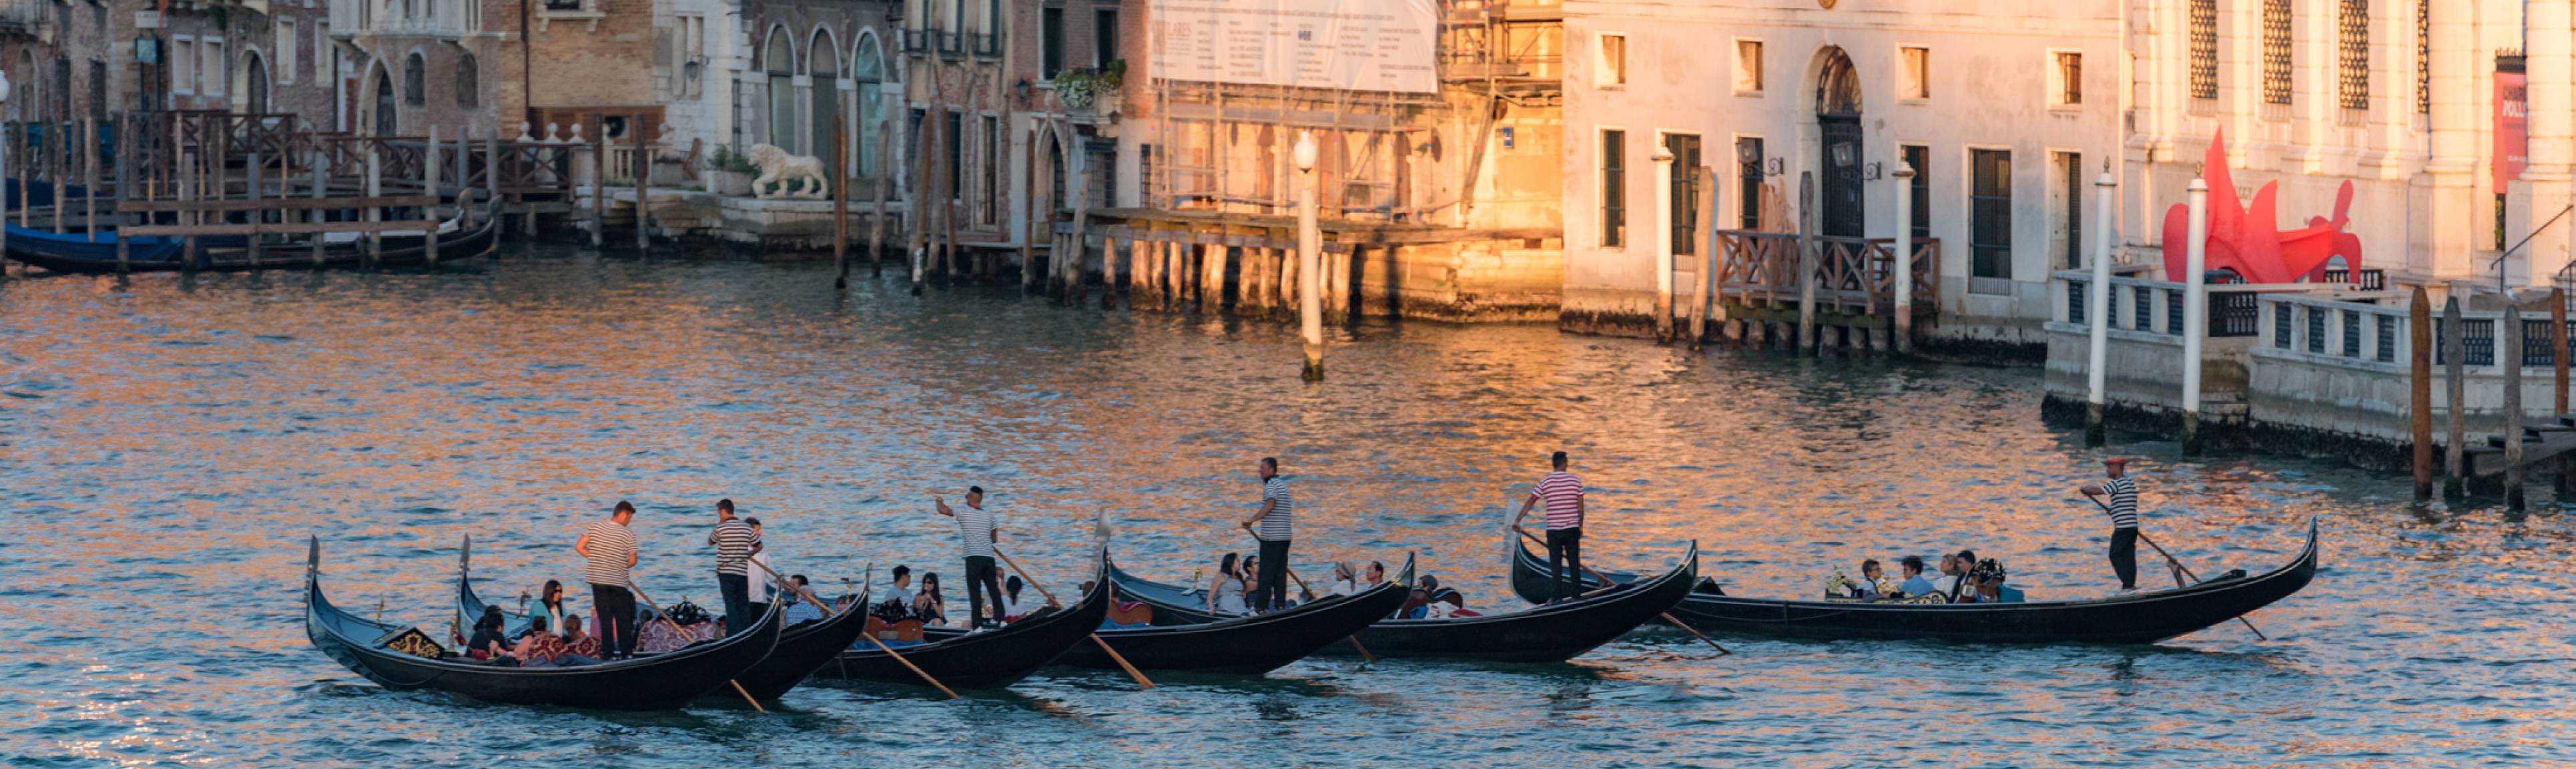 Row of passenger-filled gondolas crossing the Grand Canal at sunset